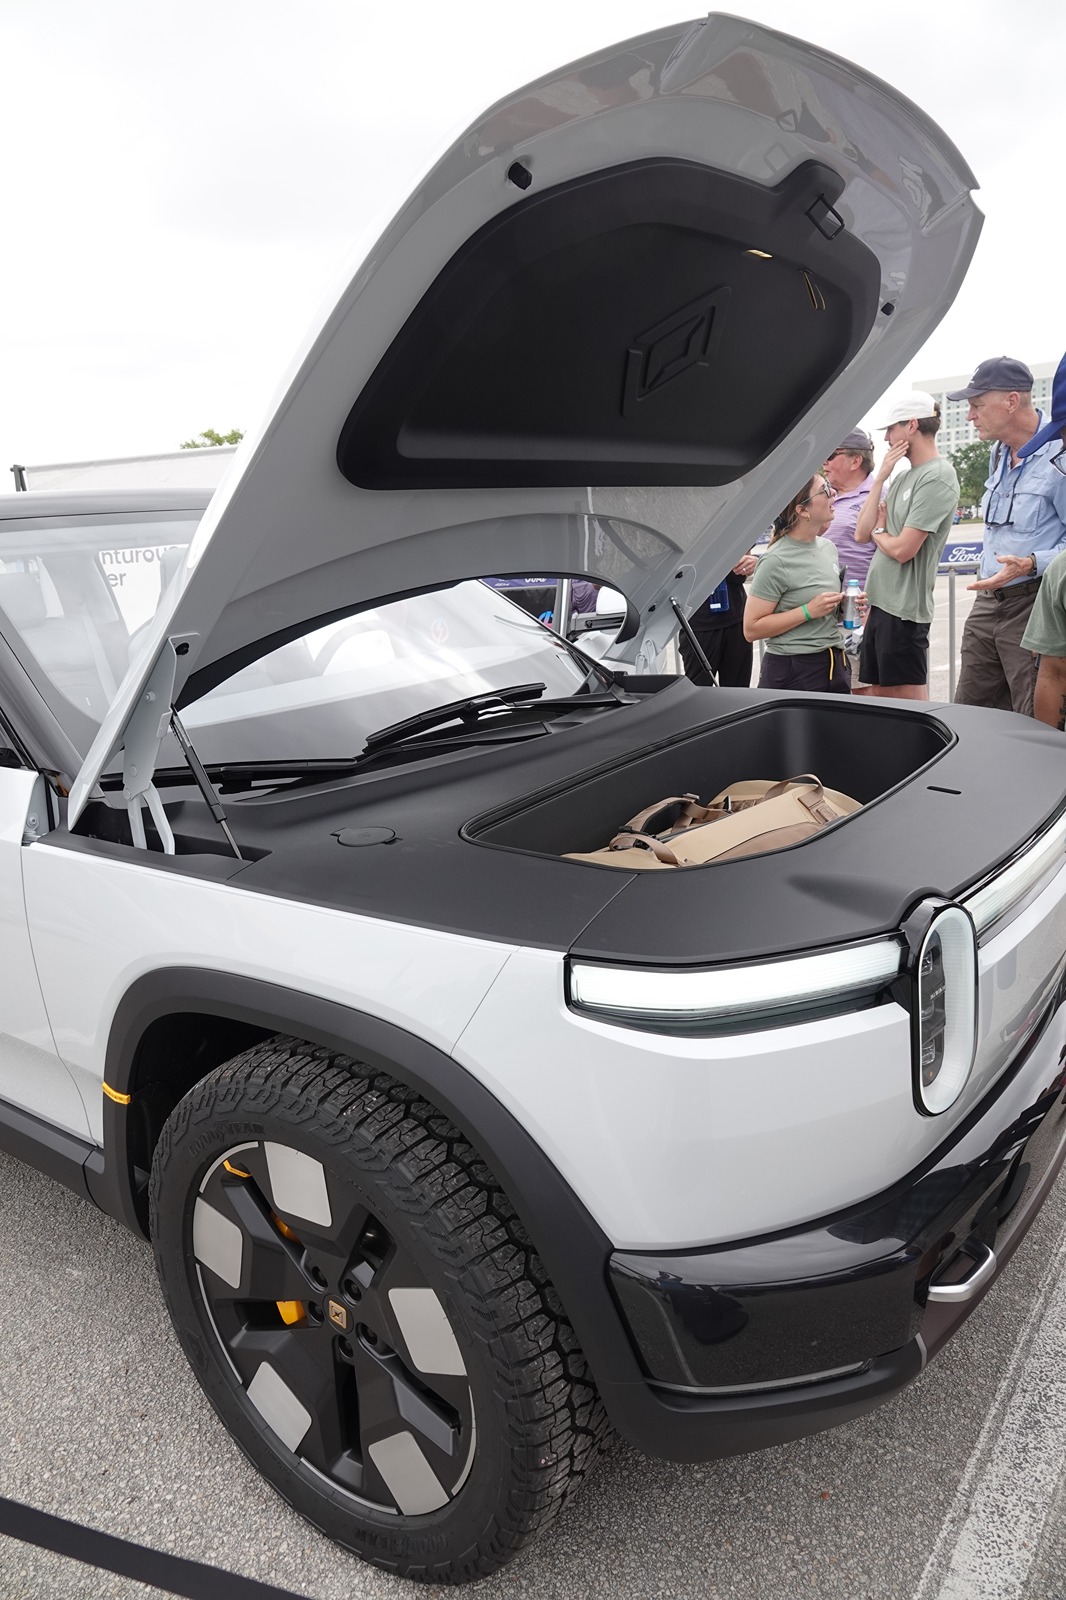 Rivian R1T R1S See the R2 @ Electrify Expo Orlando today 3/17 from 10am-5pm DSC06061.JPG